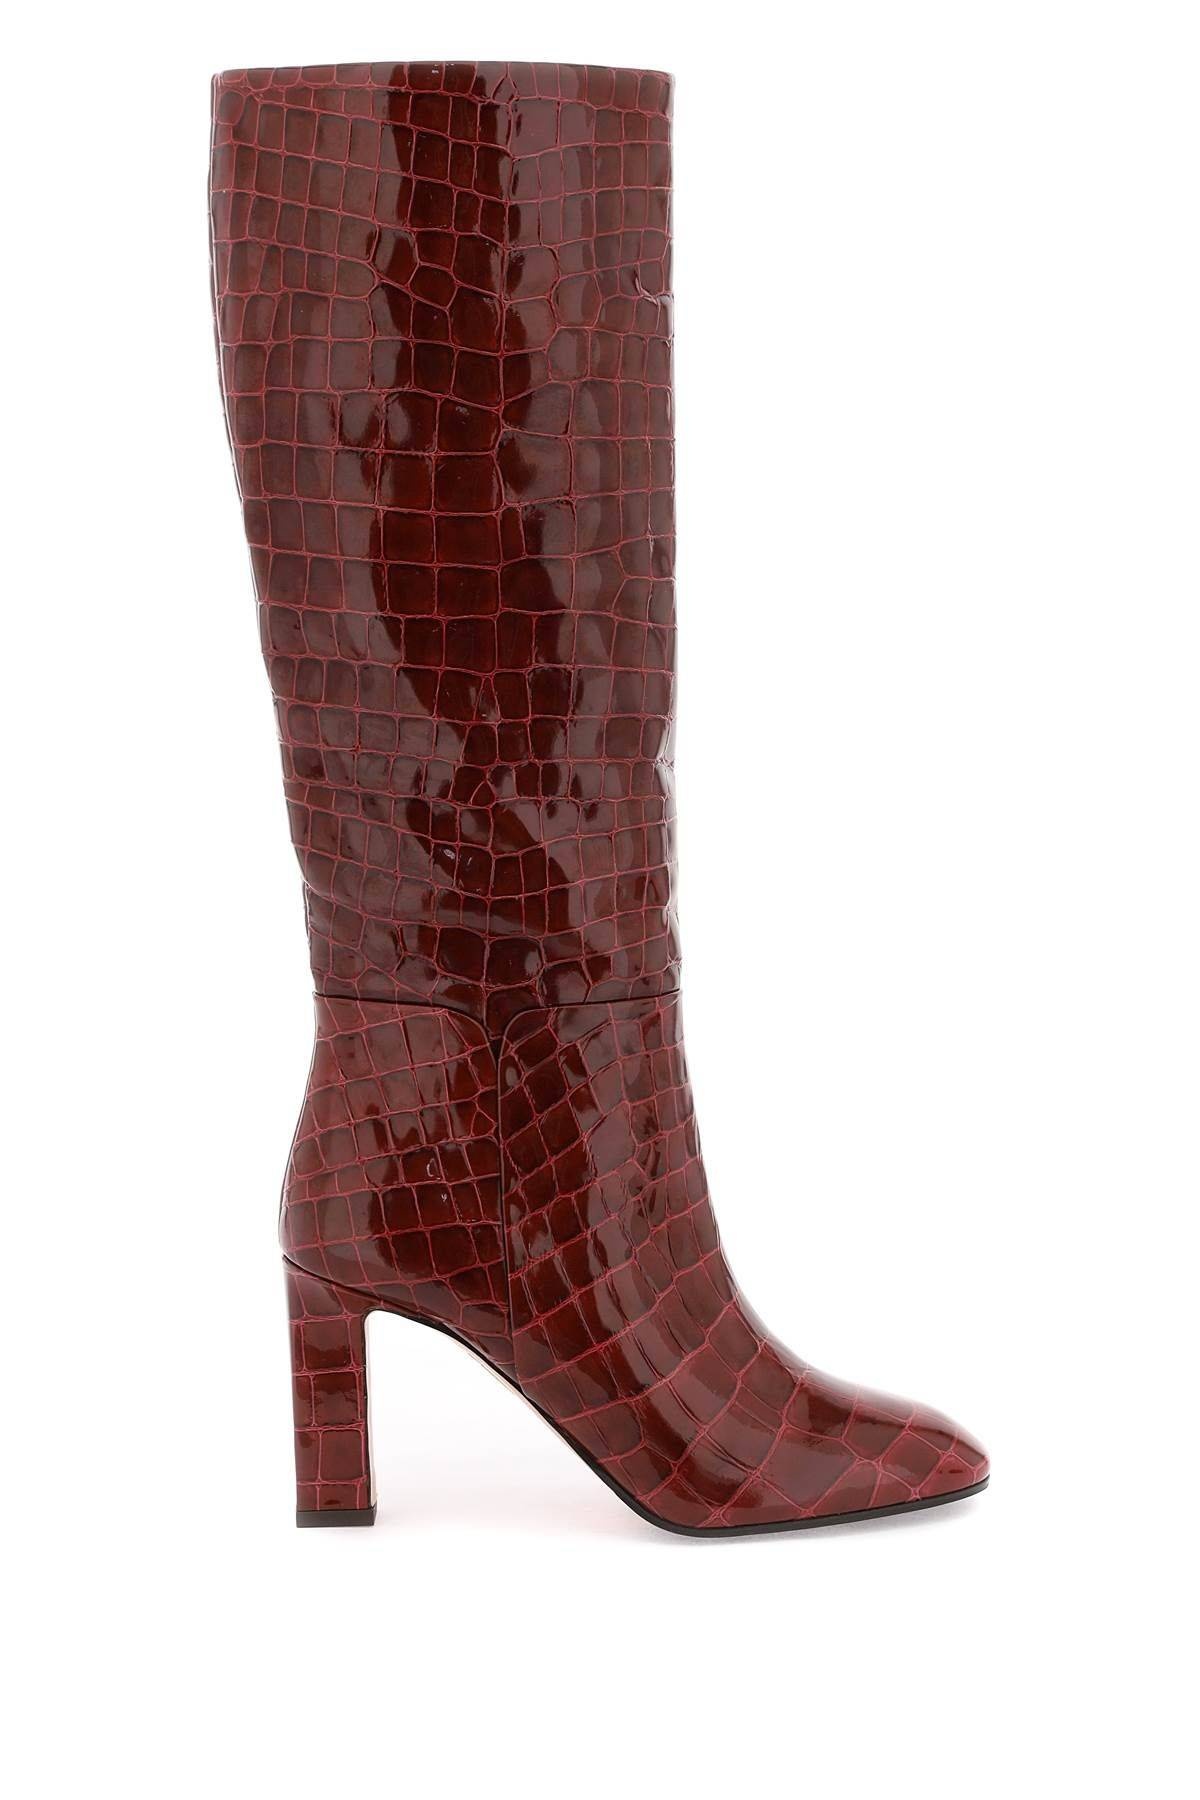 SELLIER BOOTS IN CROC-EMBOSSED LEATHER - 1